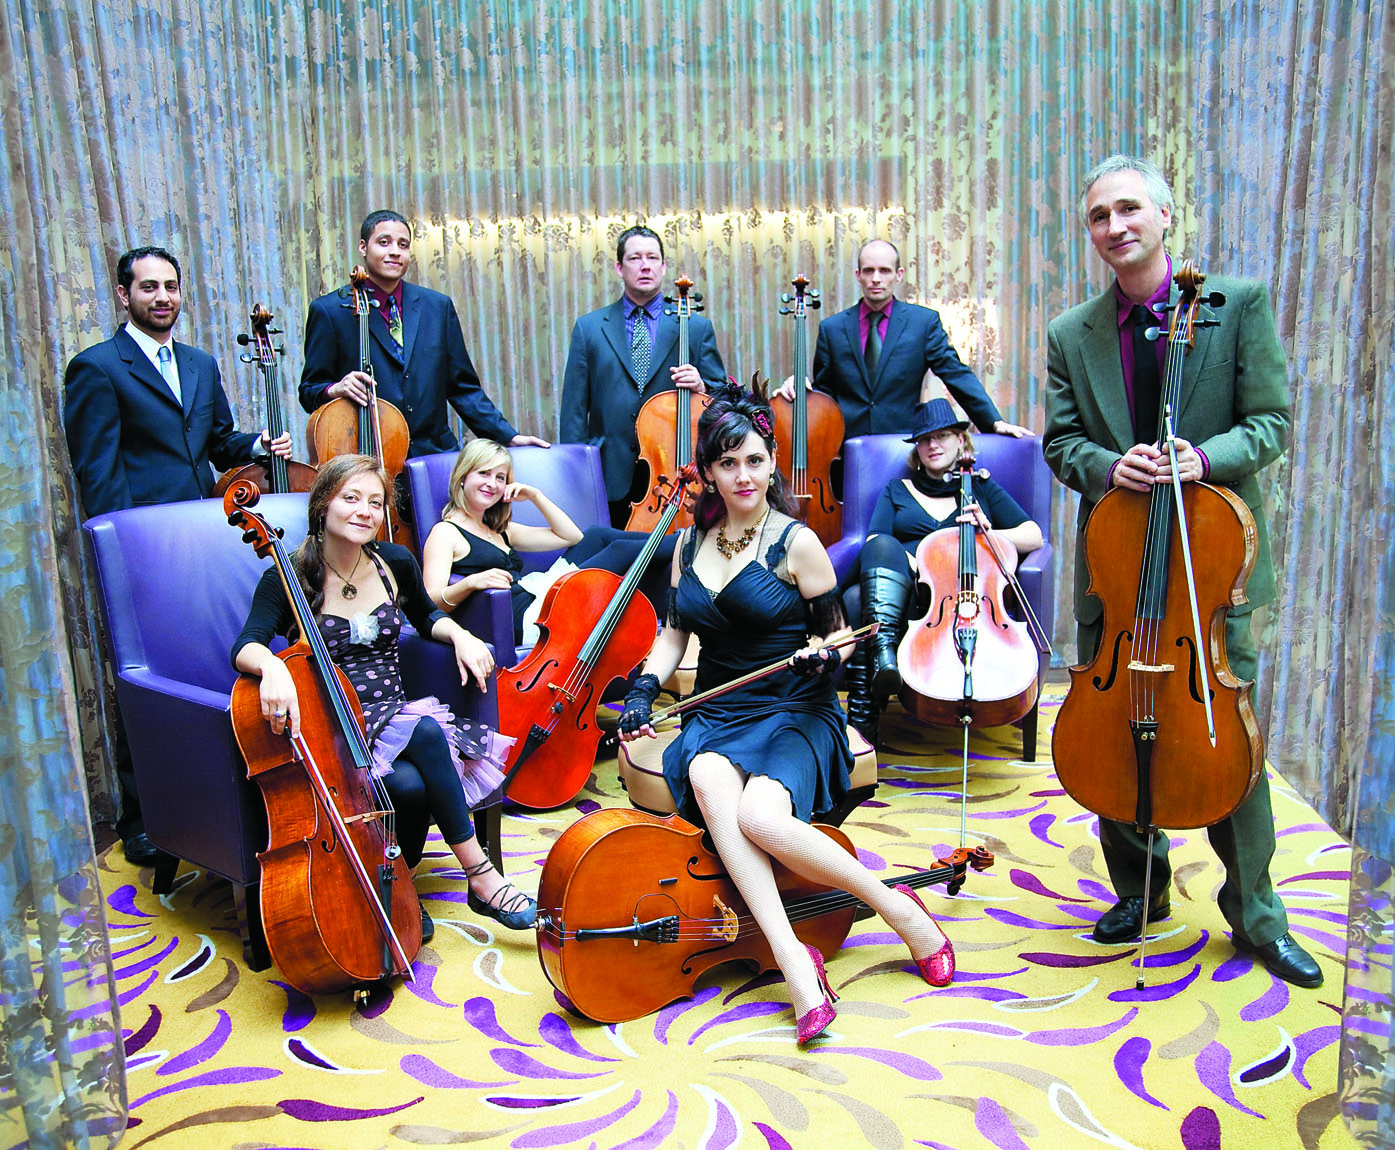 The Portland Cello Project applies its large stringed instruments to the music of Lady Gaga